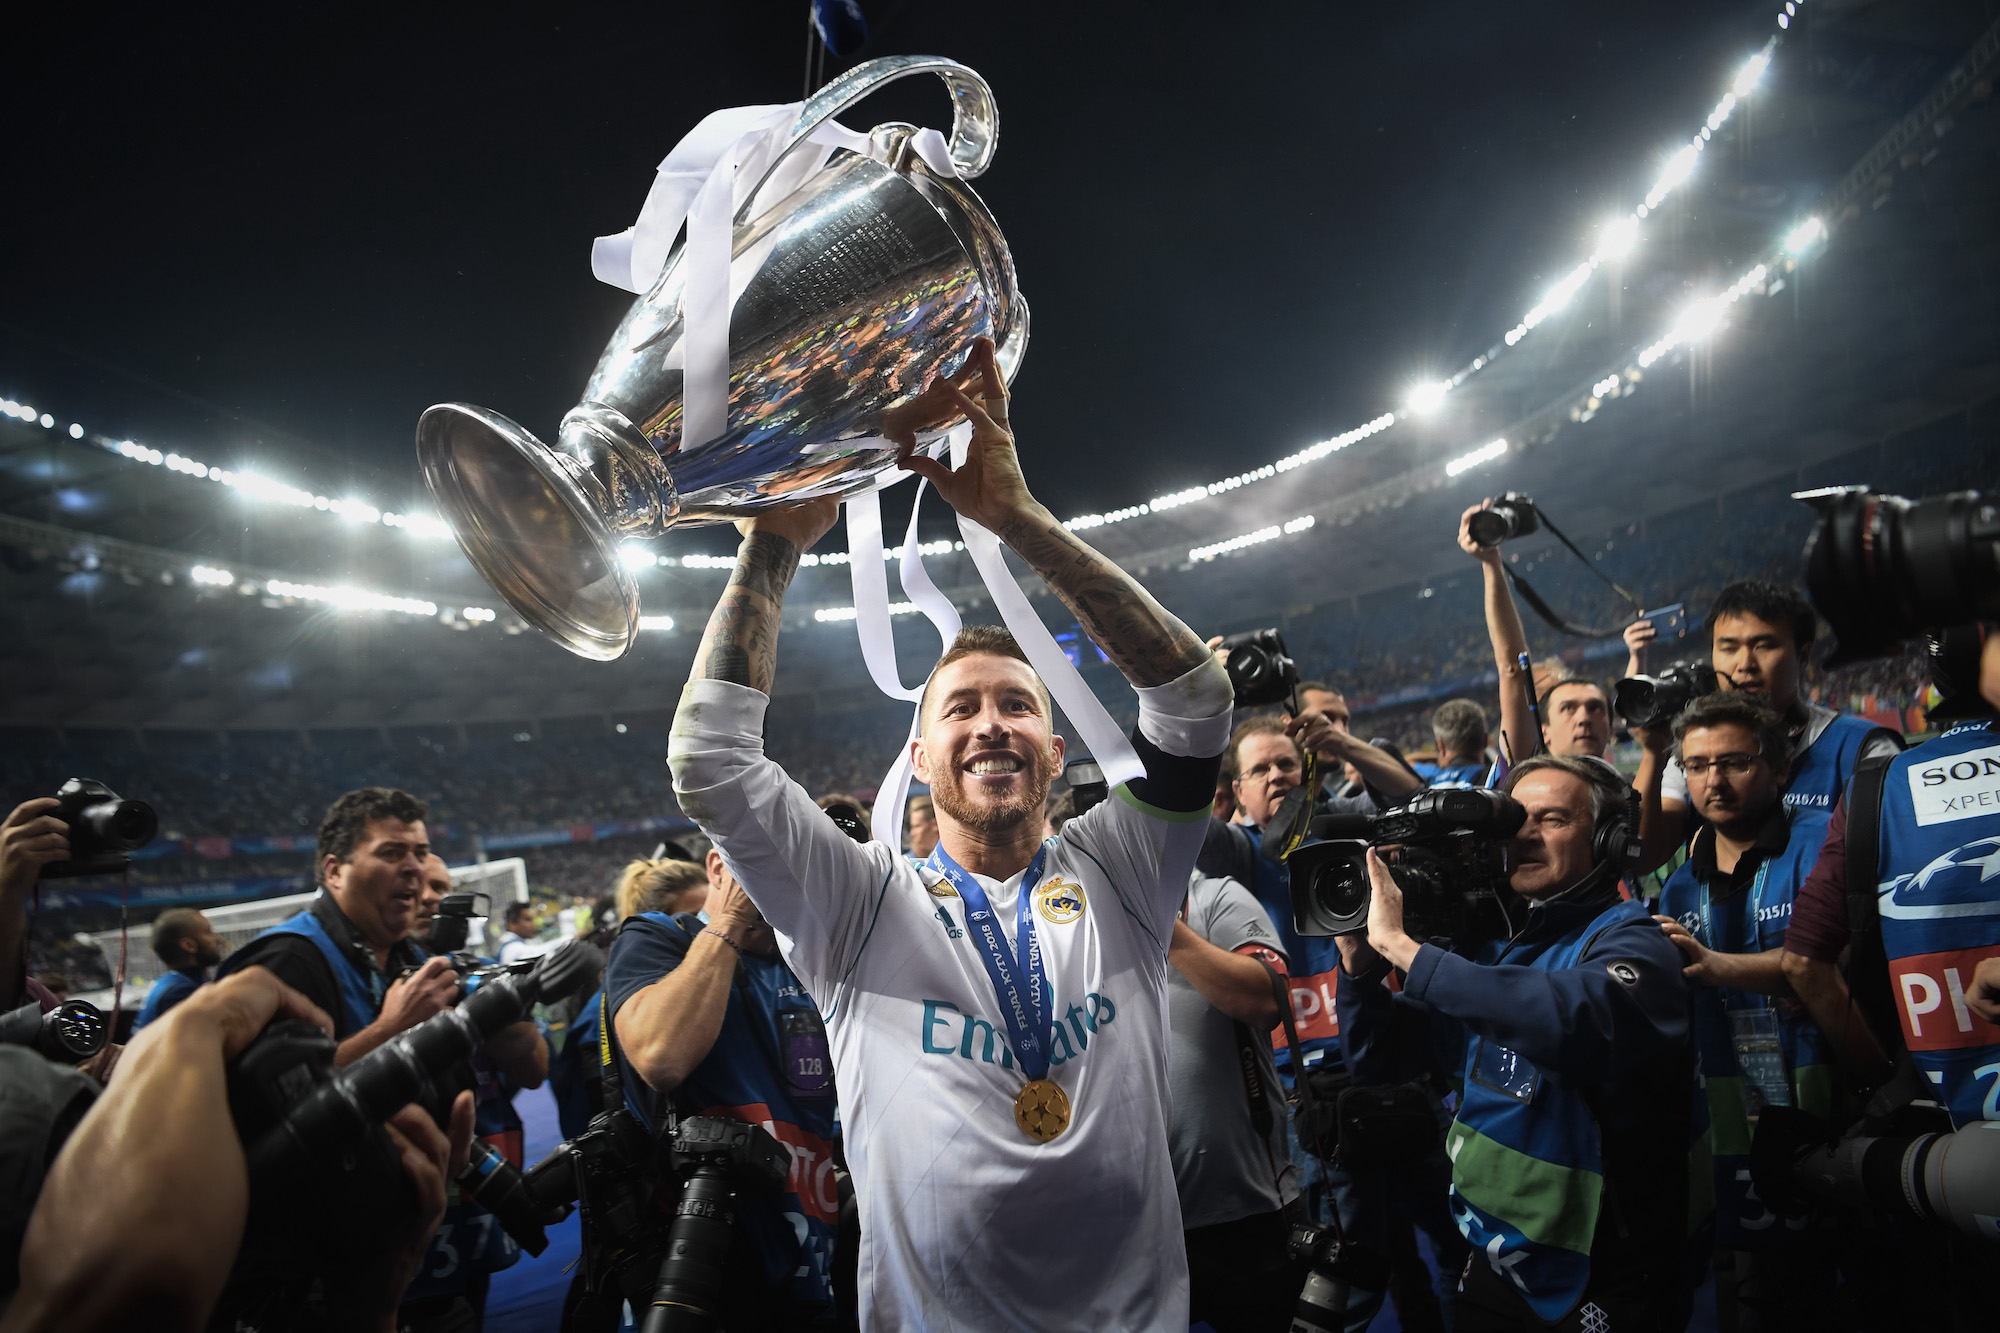 Then Real Madrid defender Sergio Ramos celebrates with the UEFA Champions League trophy following the final against Liverpool in Kyiv on May 26, 2018. It was Los Blancos' third consecutive European Cup - an unprecedented feat in the modern era.